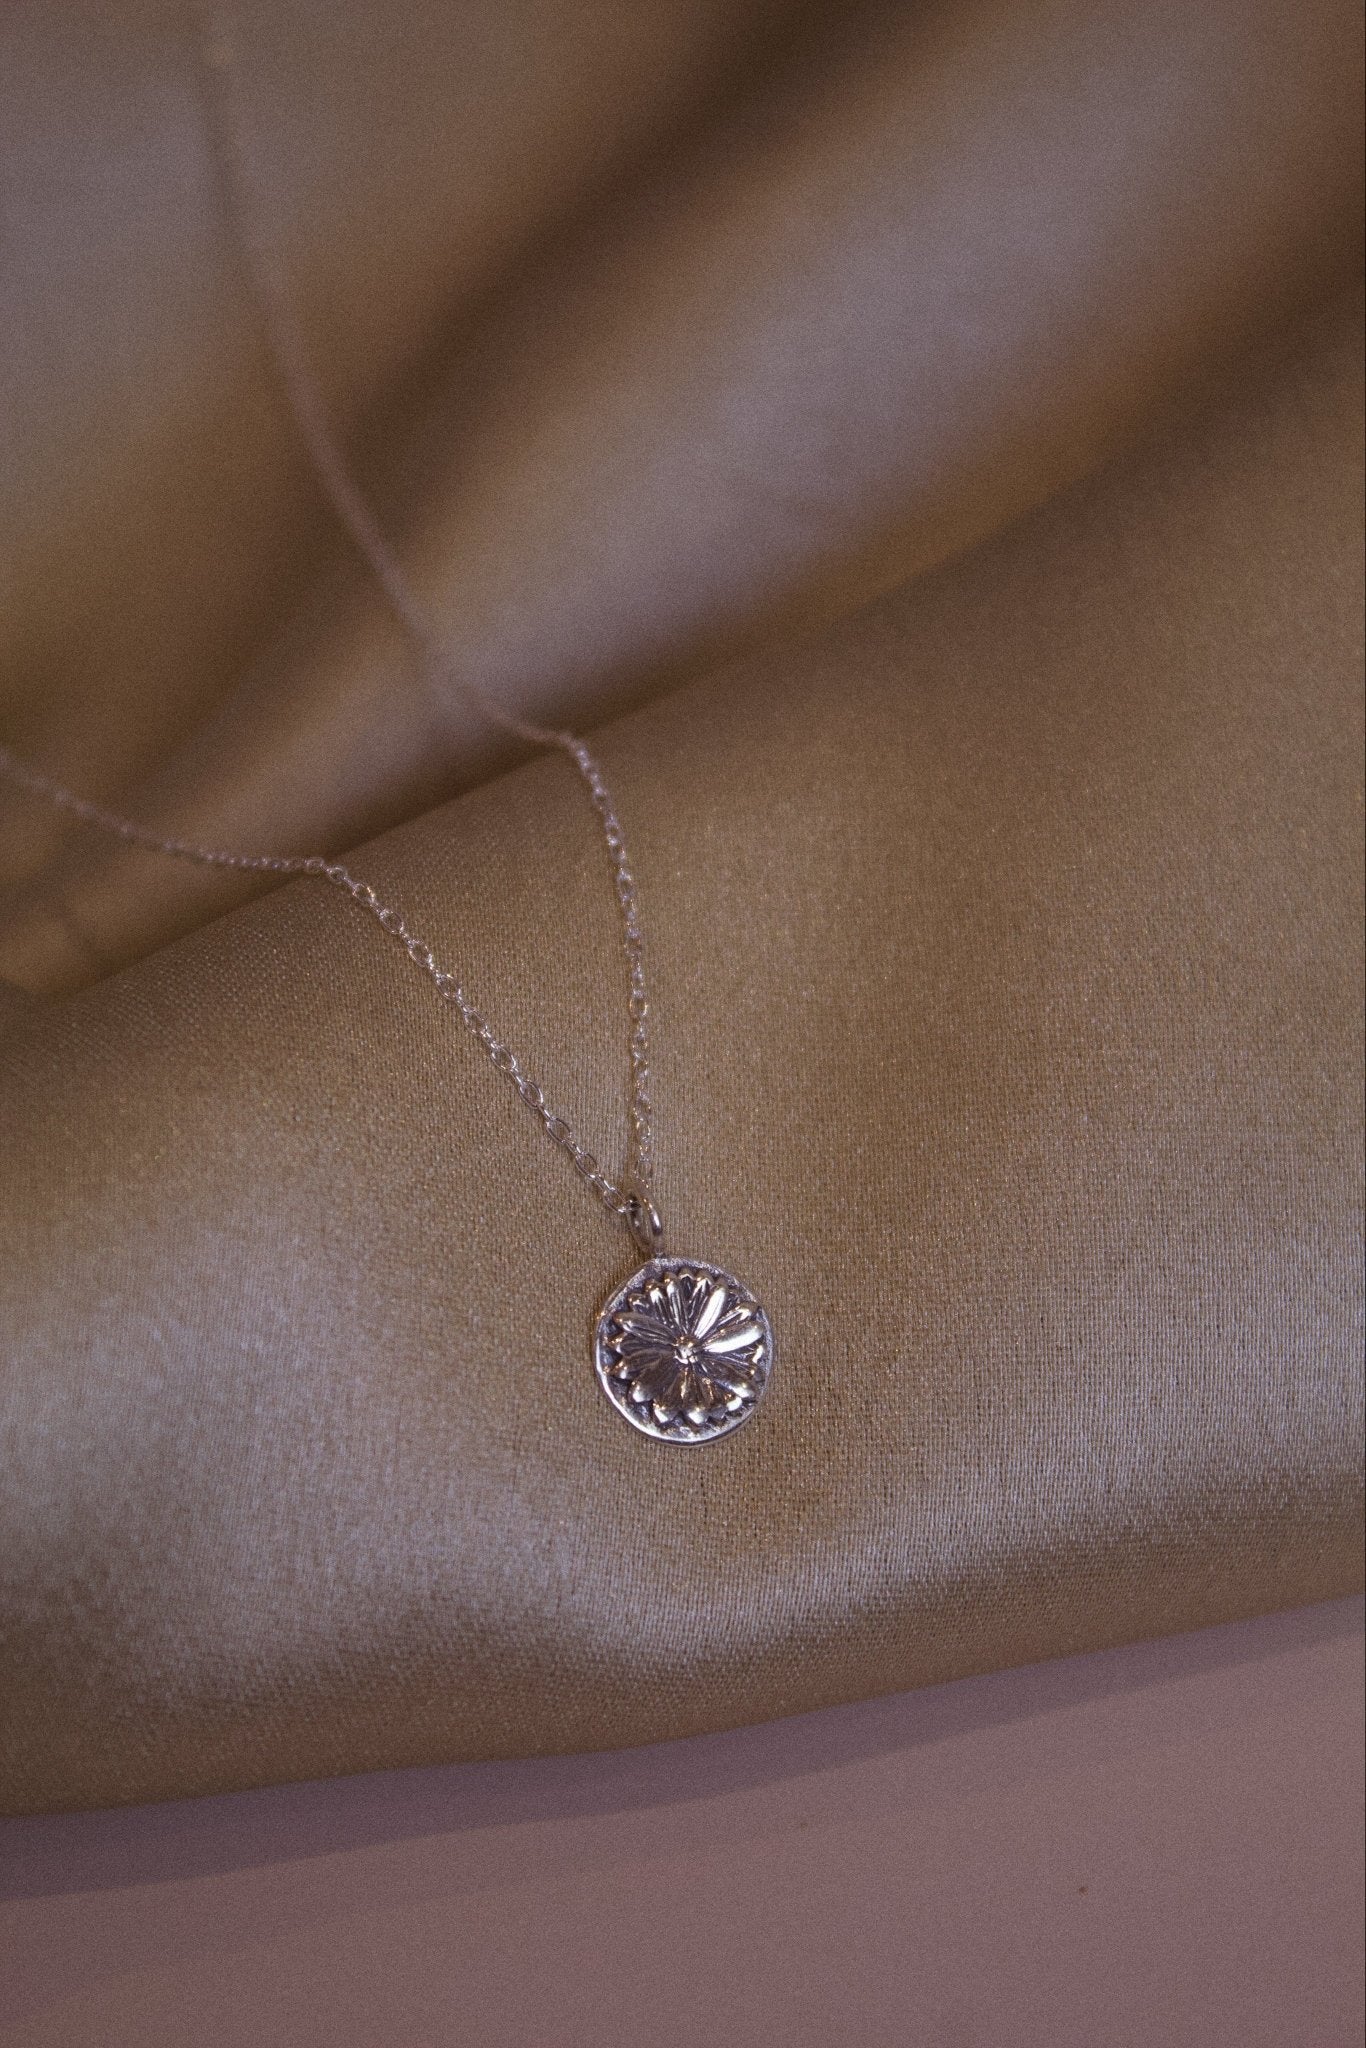 Sterling Silver Daisy Charm Necklace - Jewellery Hut